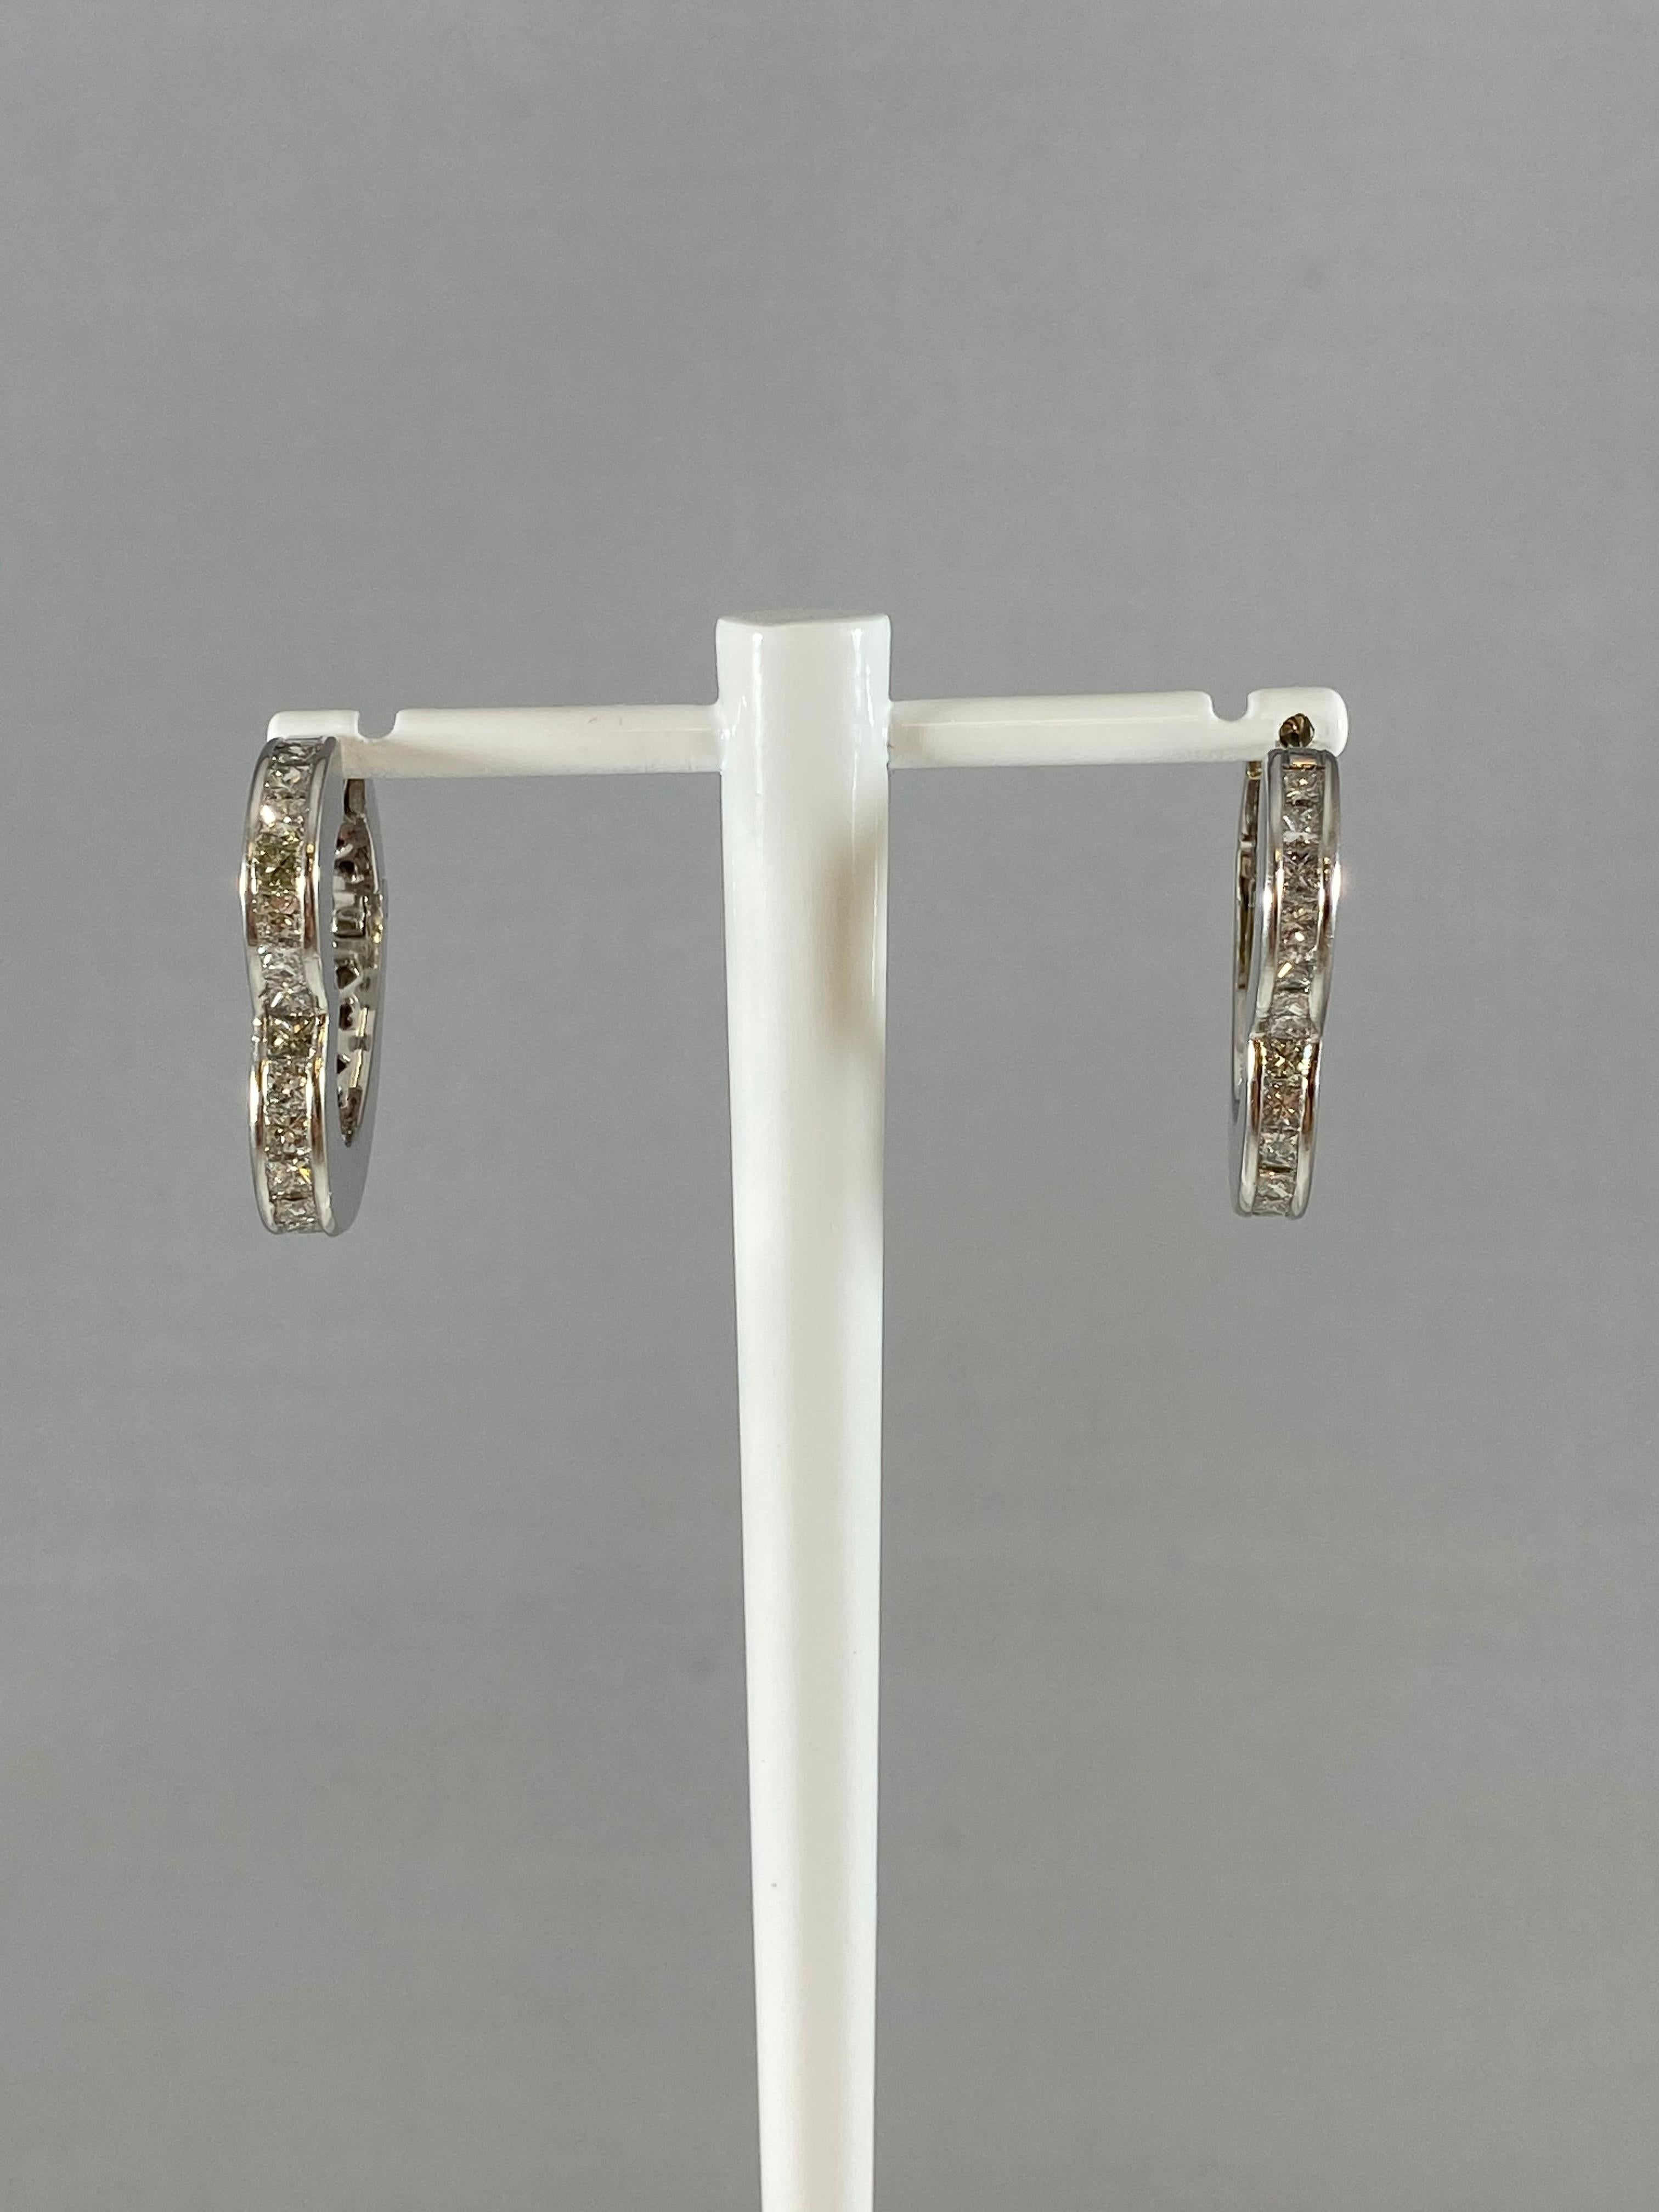 Heart hoops never go out of style. Hammerman Brothers platinum heart hoops with white princess cut diamonds. 28 diamonds, totaling 1.99 carats. 